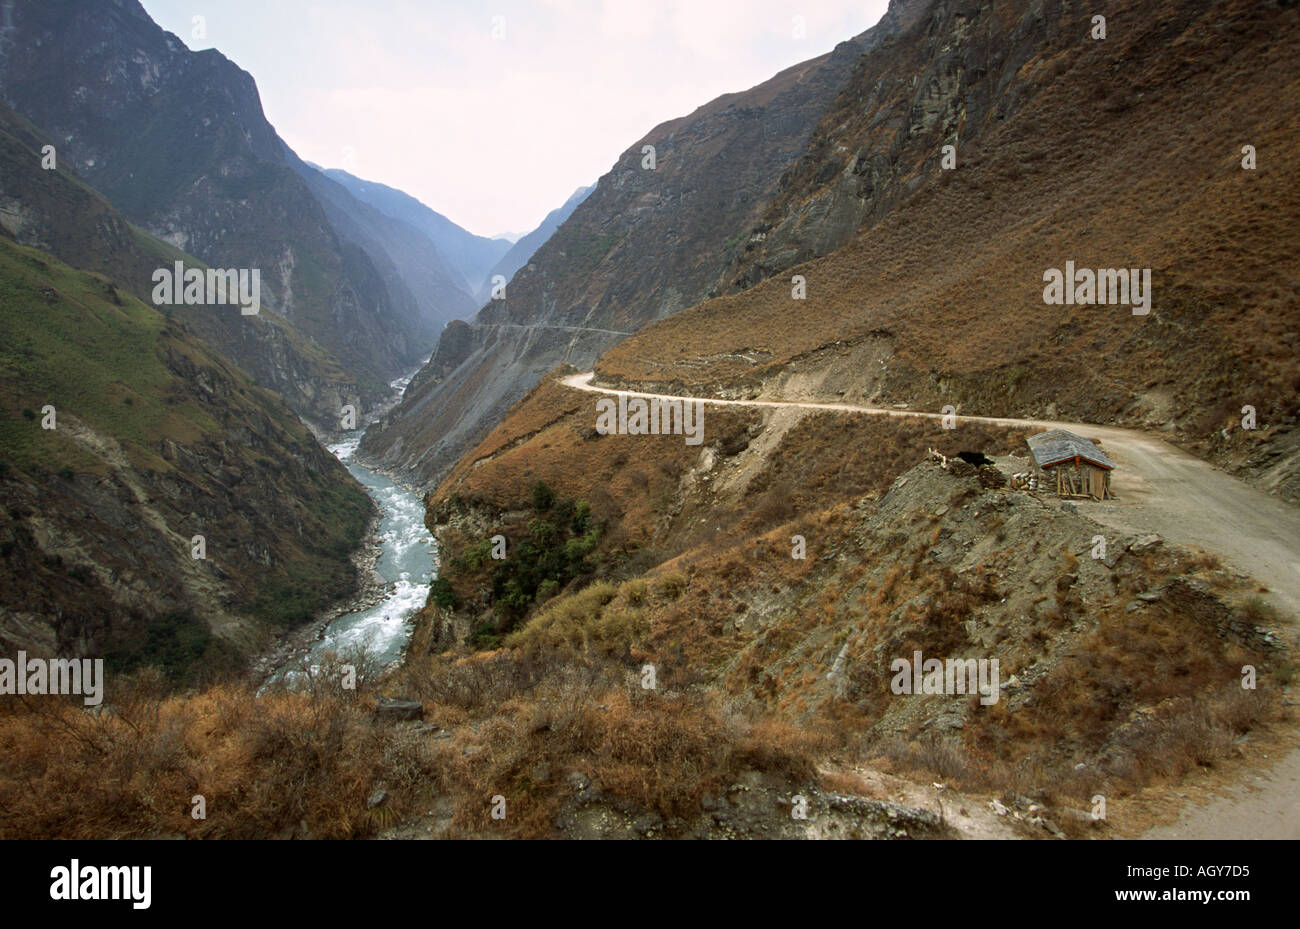 China Yunnan Tiger Leaping Gorge Jinshu River with new road above Stock Photo